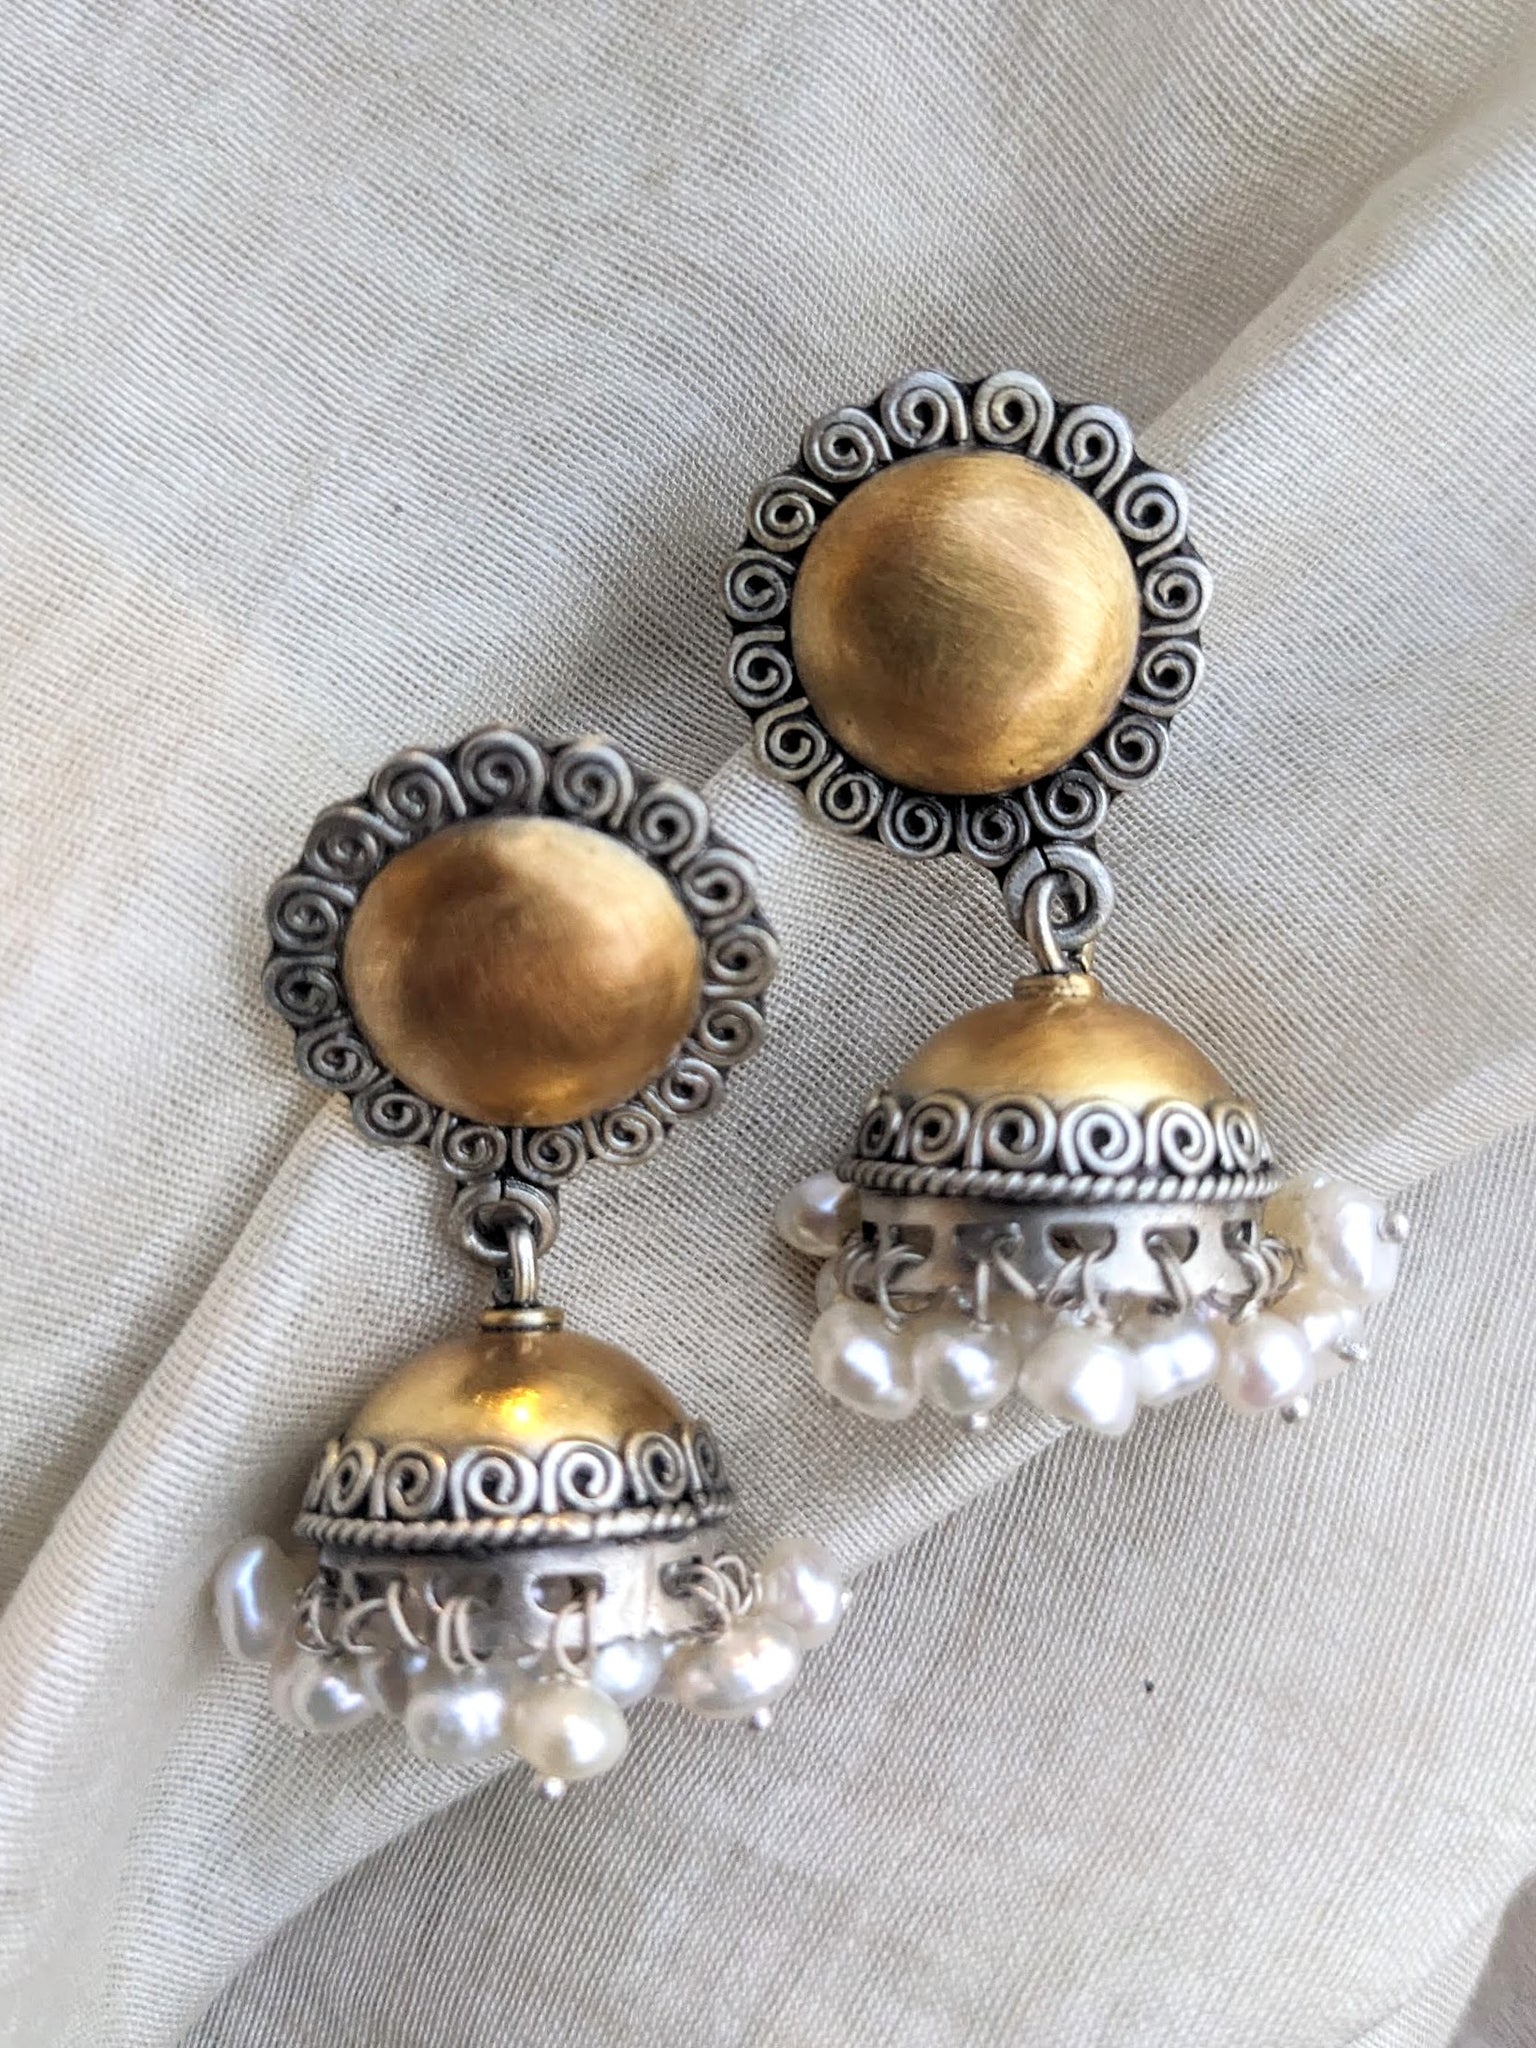 Brass And Silver Jhumka With... - Natures Buggy Landscape | Facebook